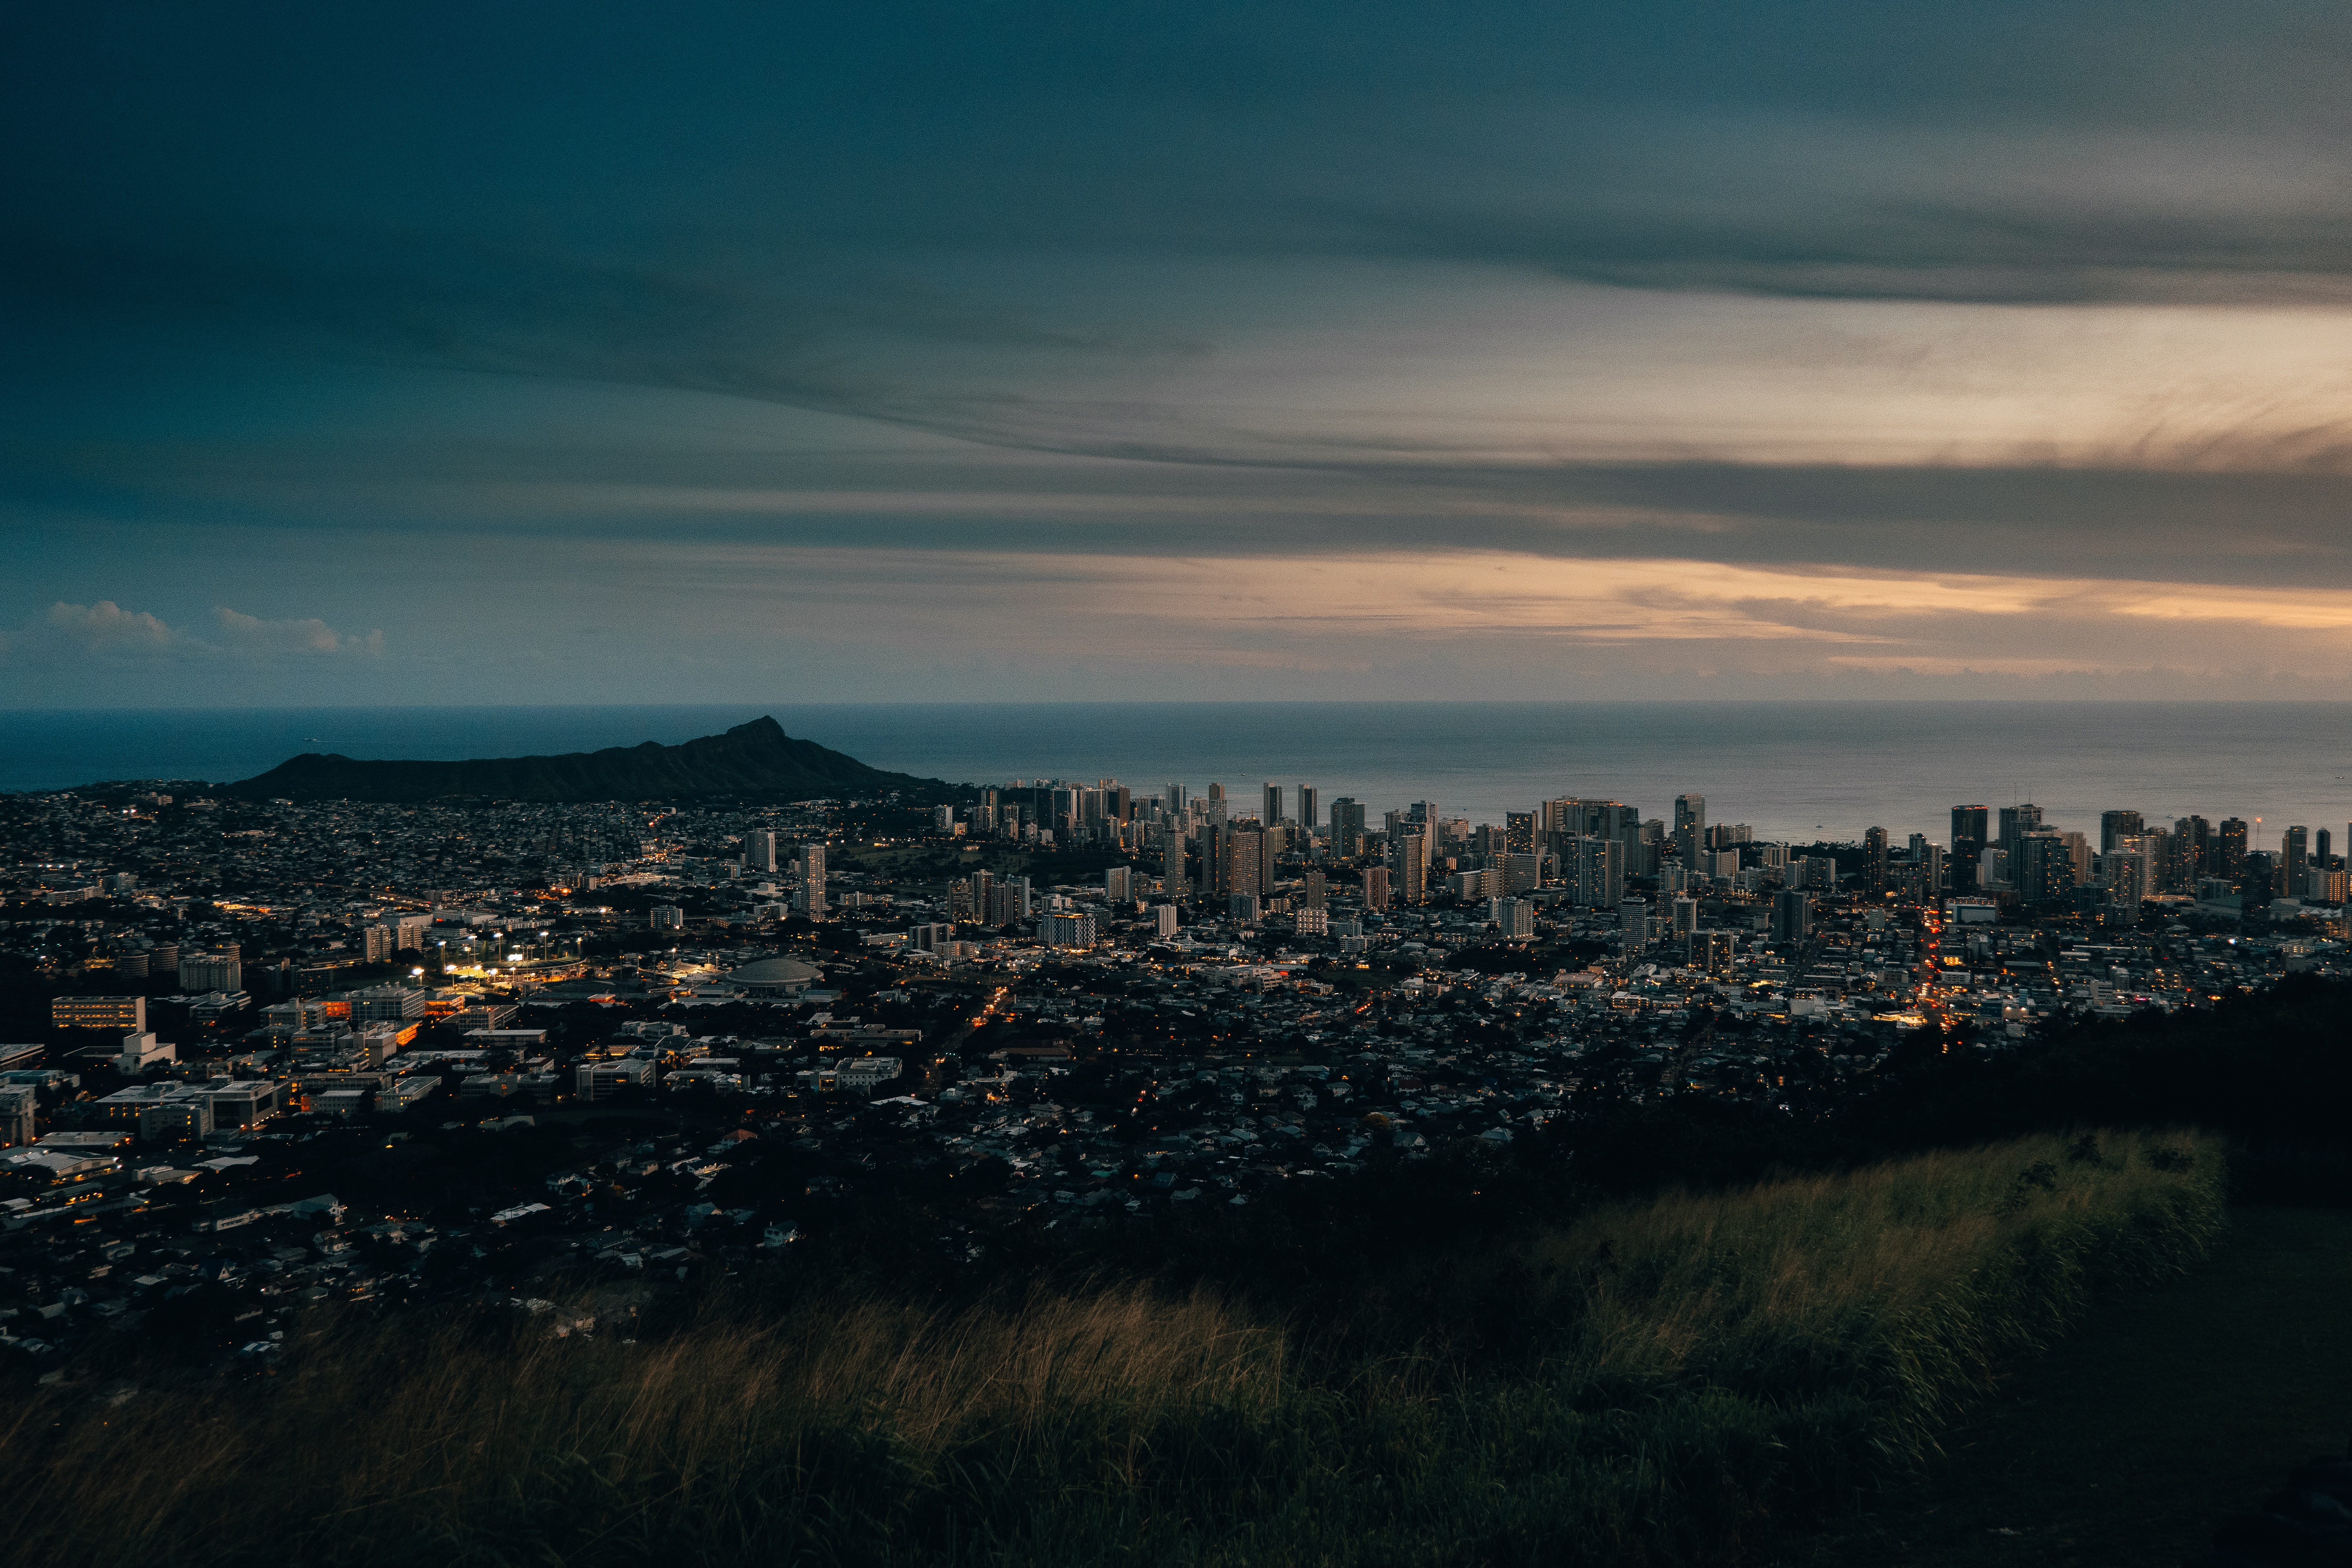 Free HD cities, sunset, city, building, view from above, urban landscape, cityscape